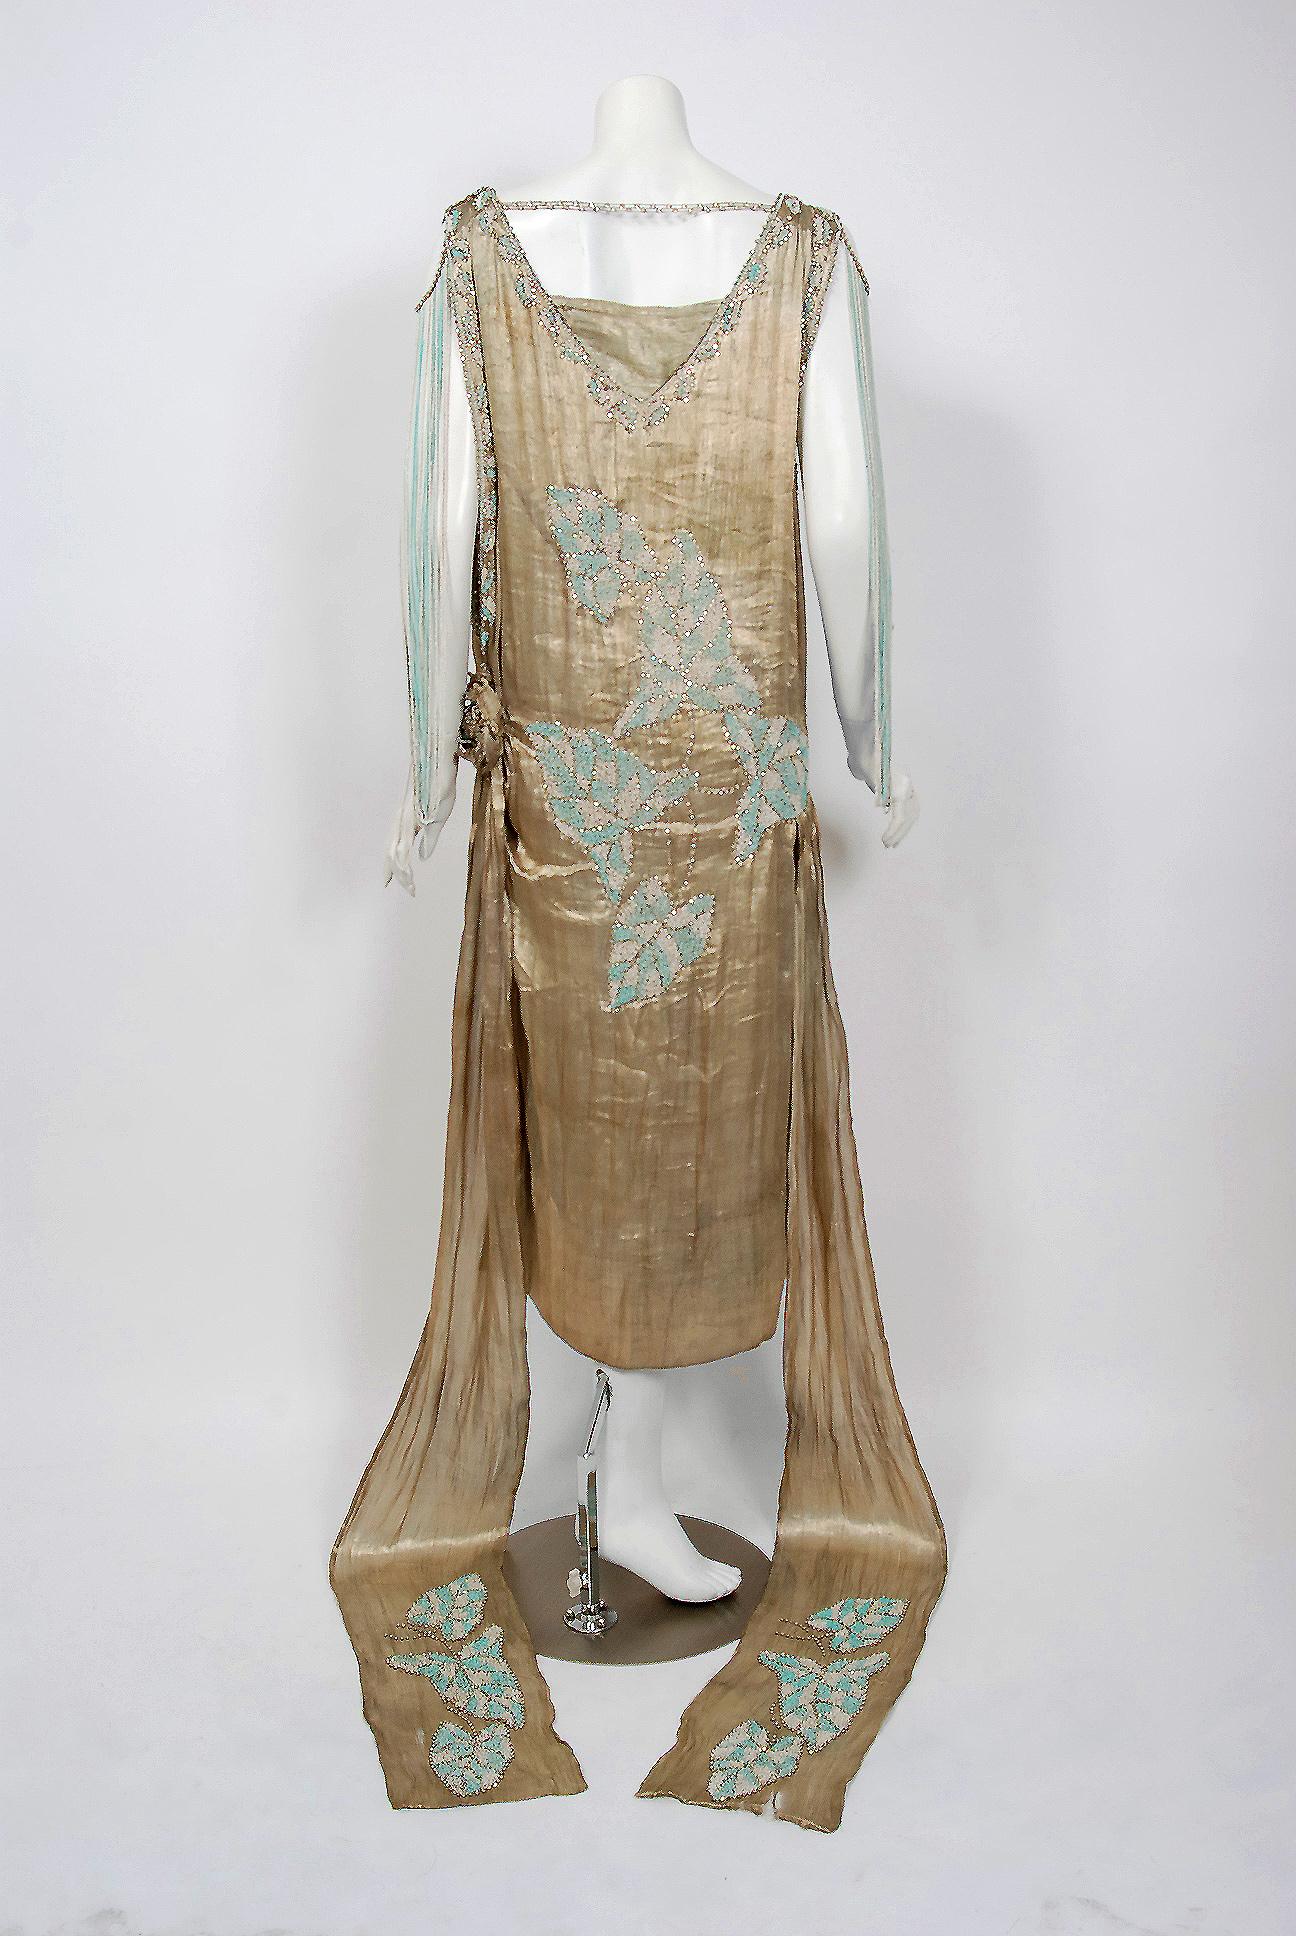 1920's French Couture Metallic Gold Lamé Beaded Leaf-Motif Trained Flapper Dress For Sale 7